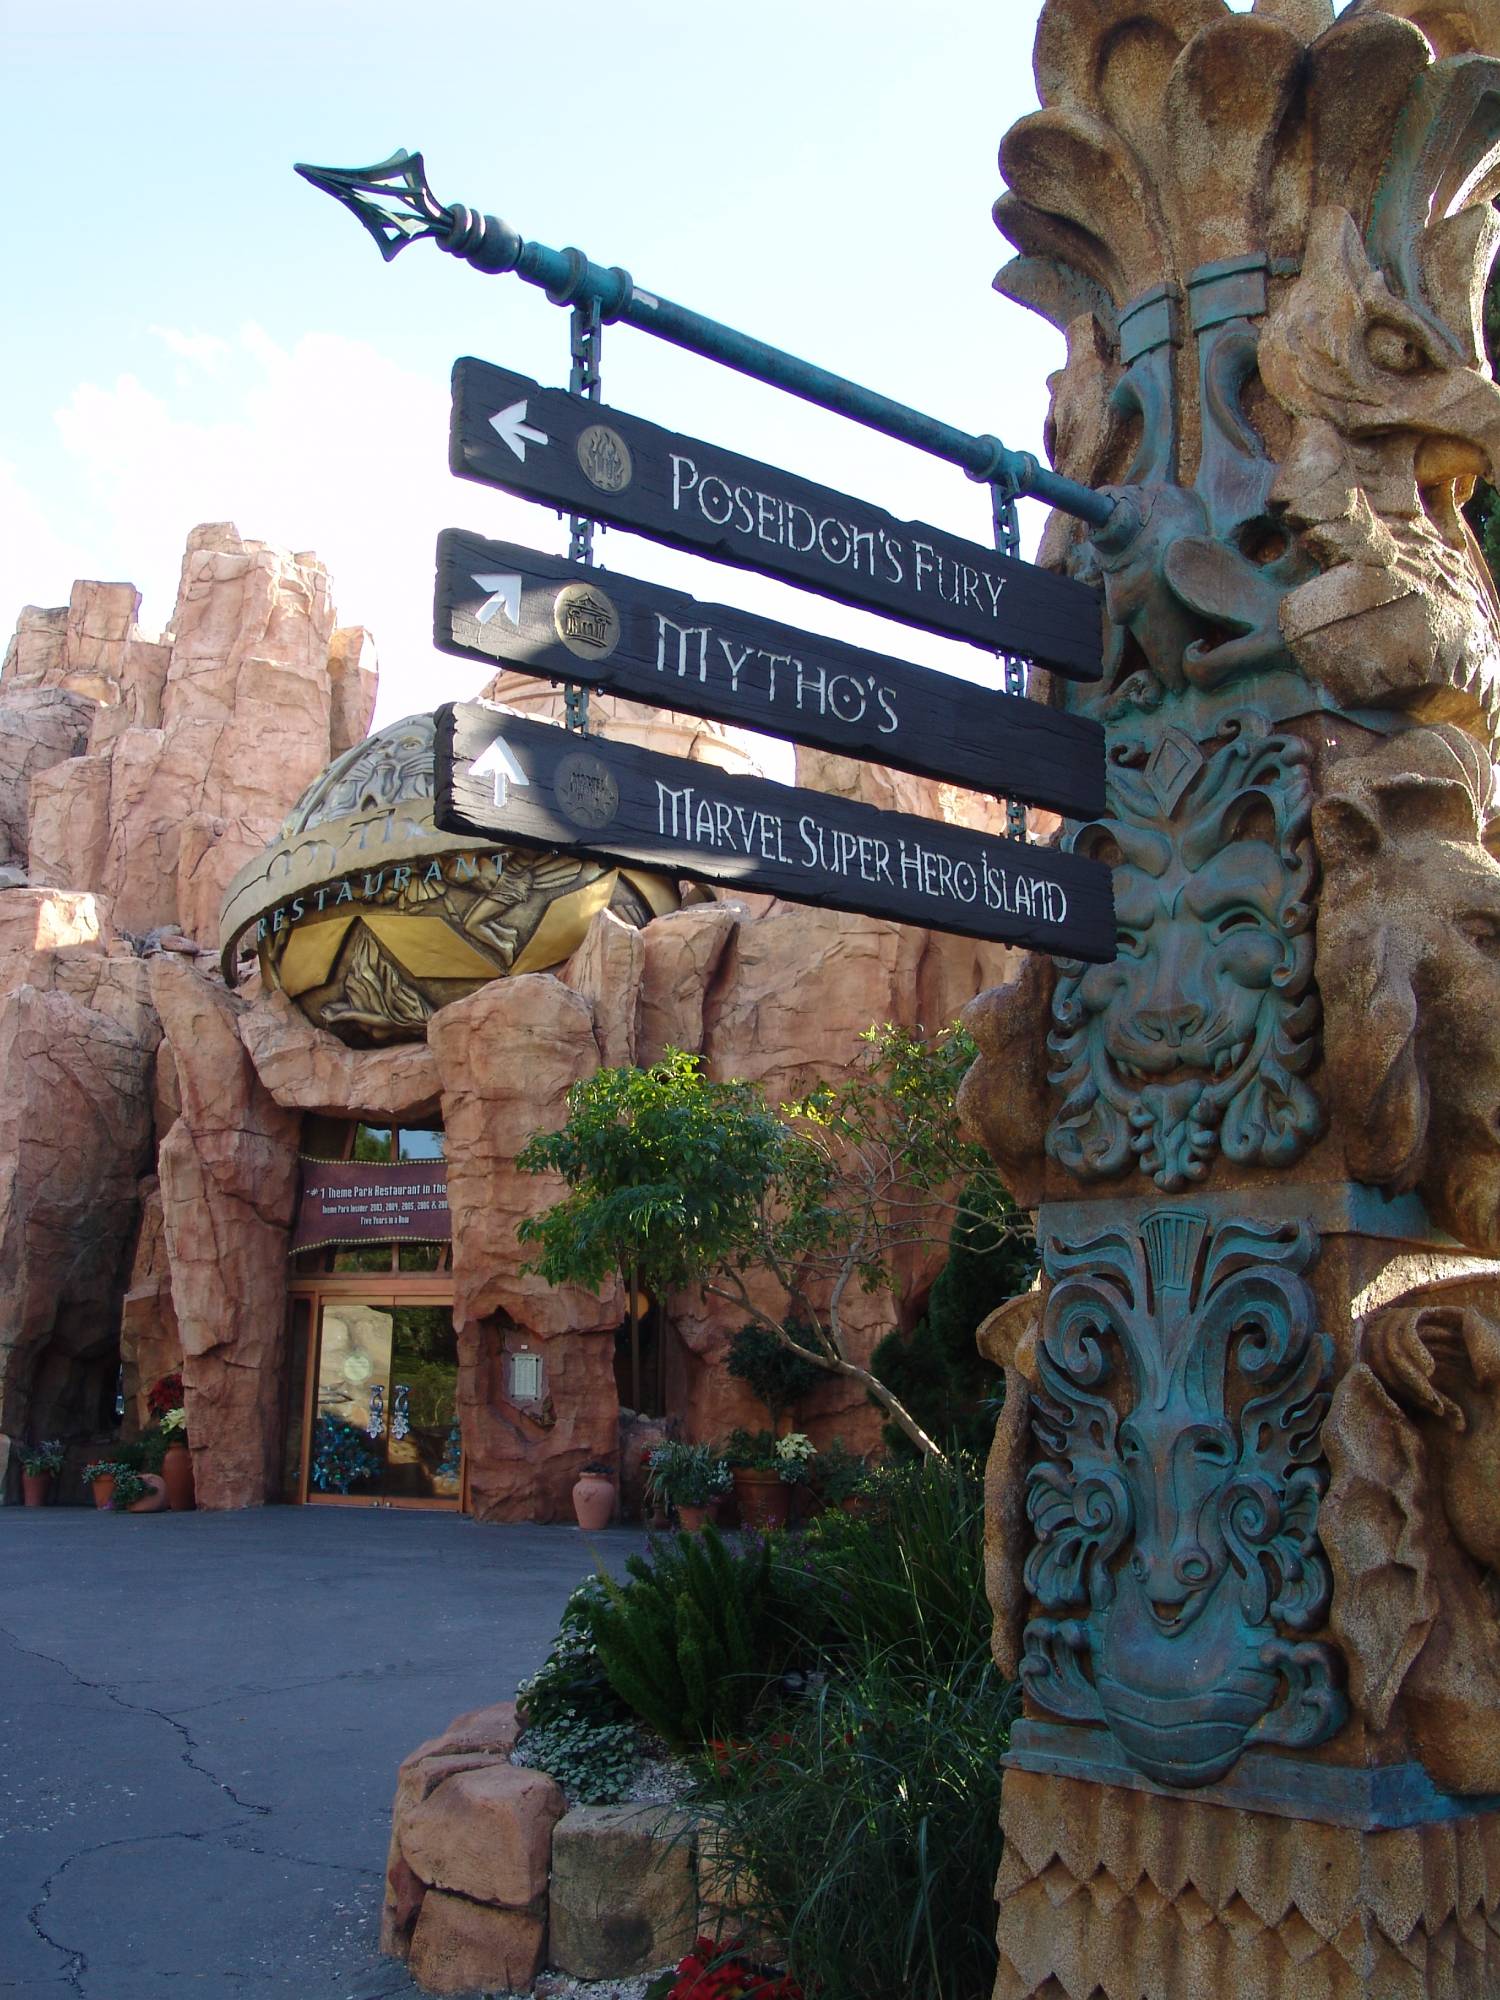 Islands of Adventure - the Lost Continent